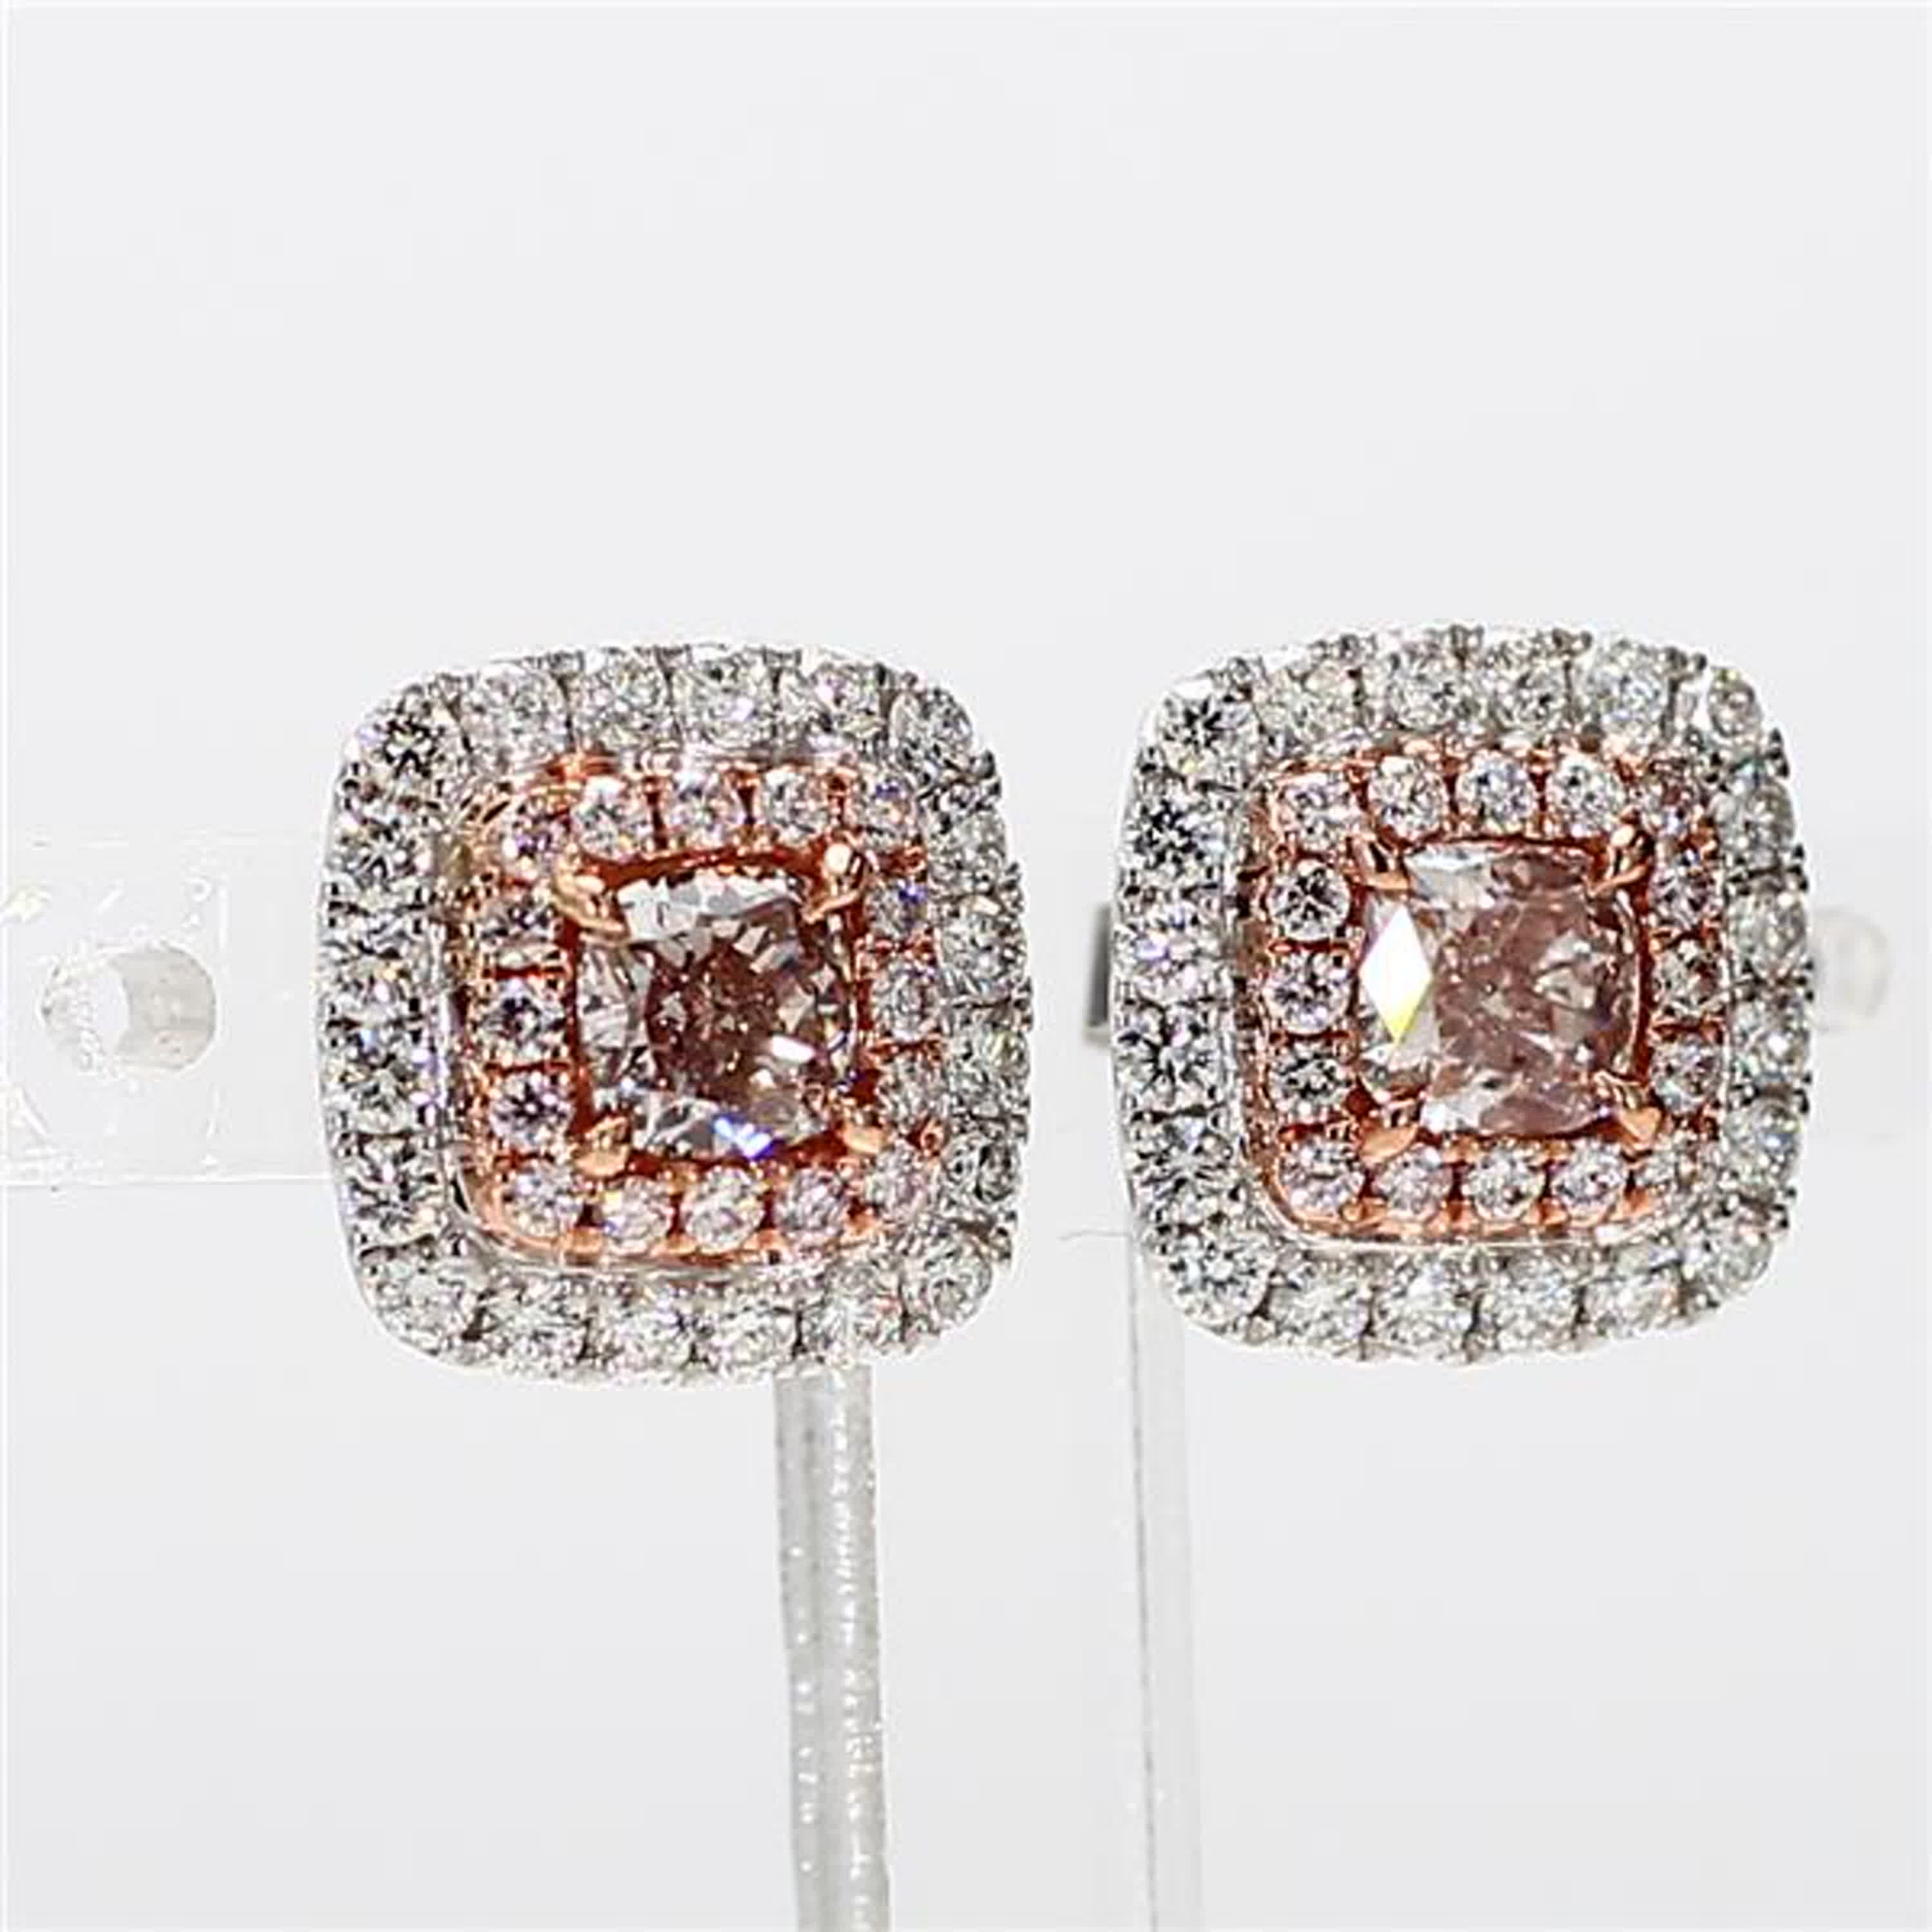 GIA Certified Natural Pink Cushion and White Diamond 1.36 Carat TW Gold Earrings